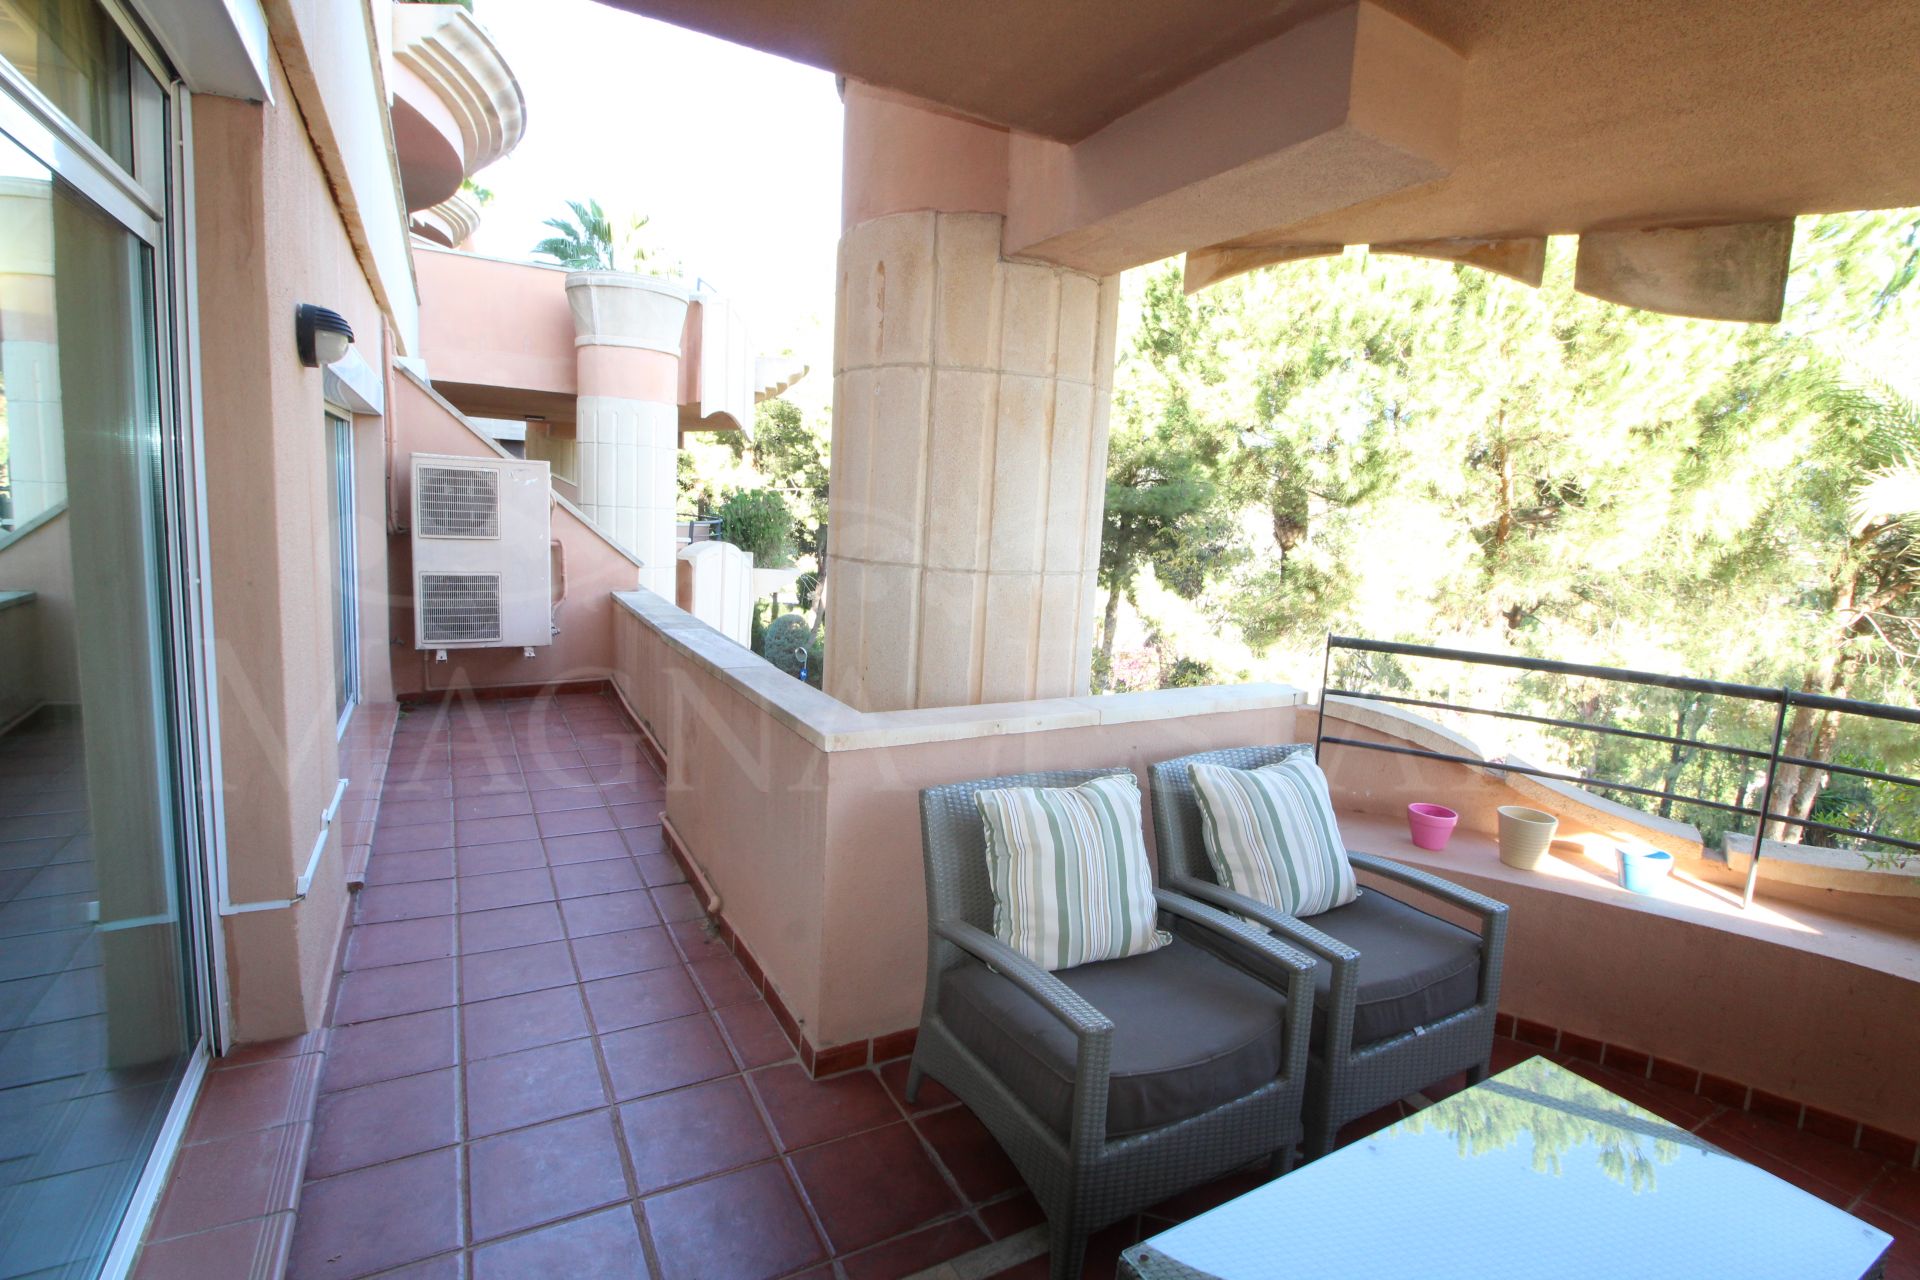 2 bedroom apartment in Magna Marbella, with 2 golf shares included